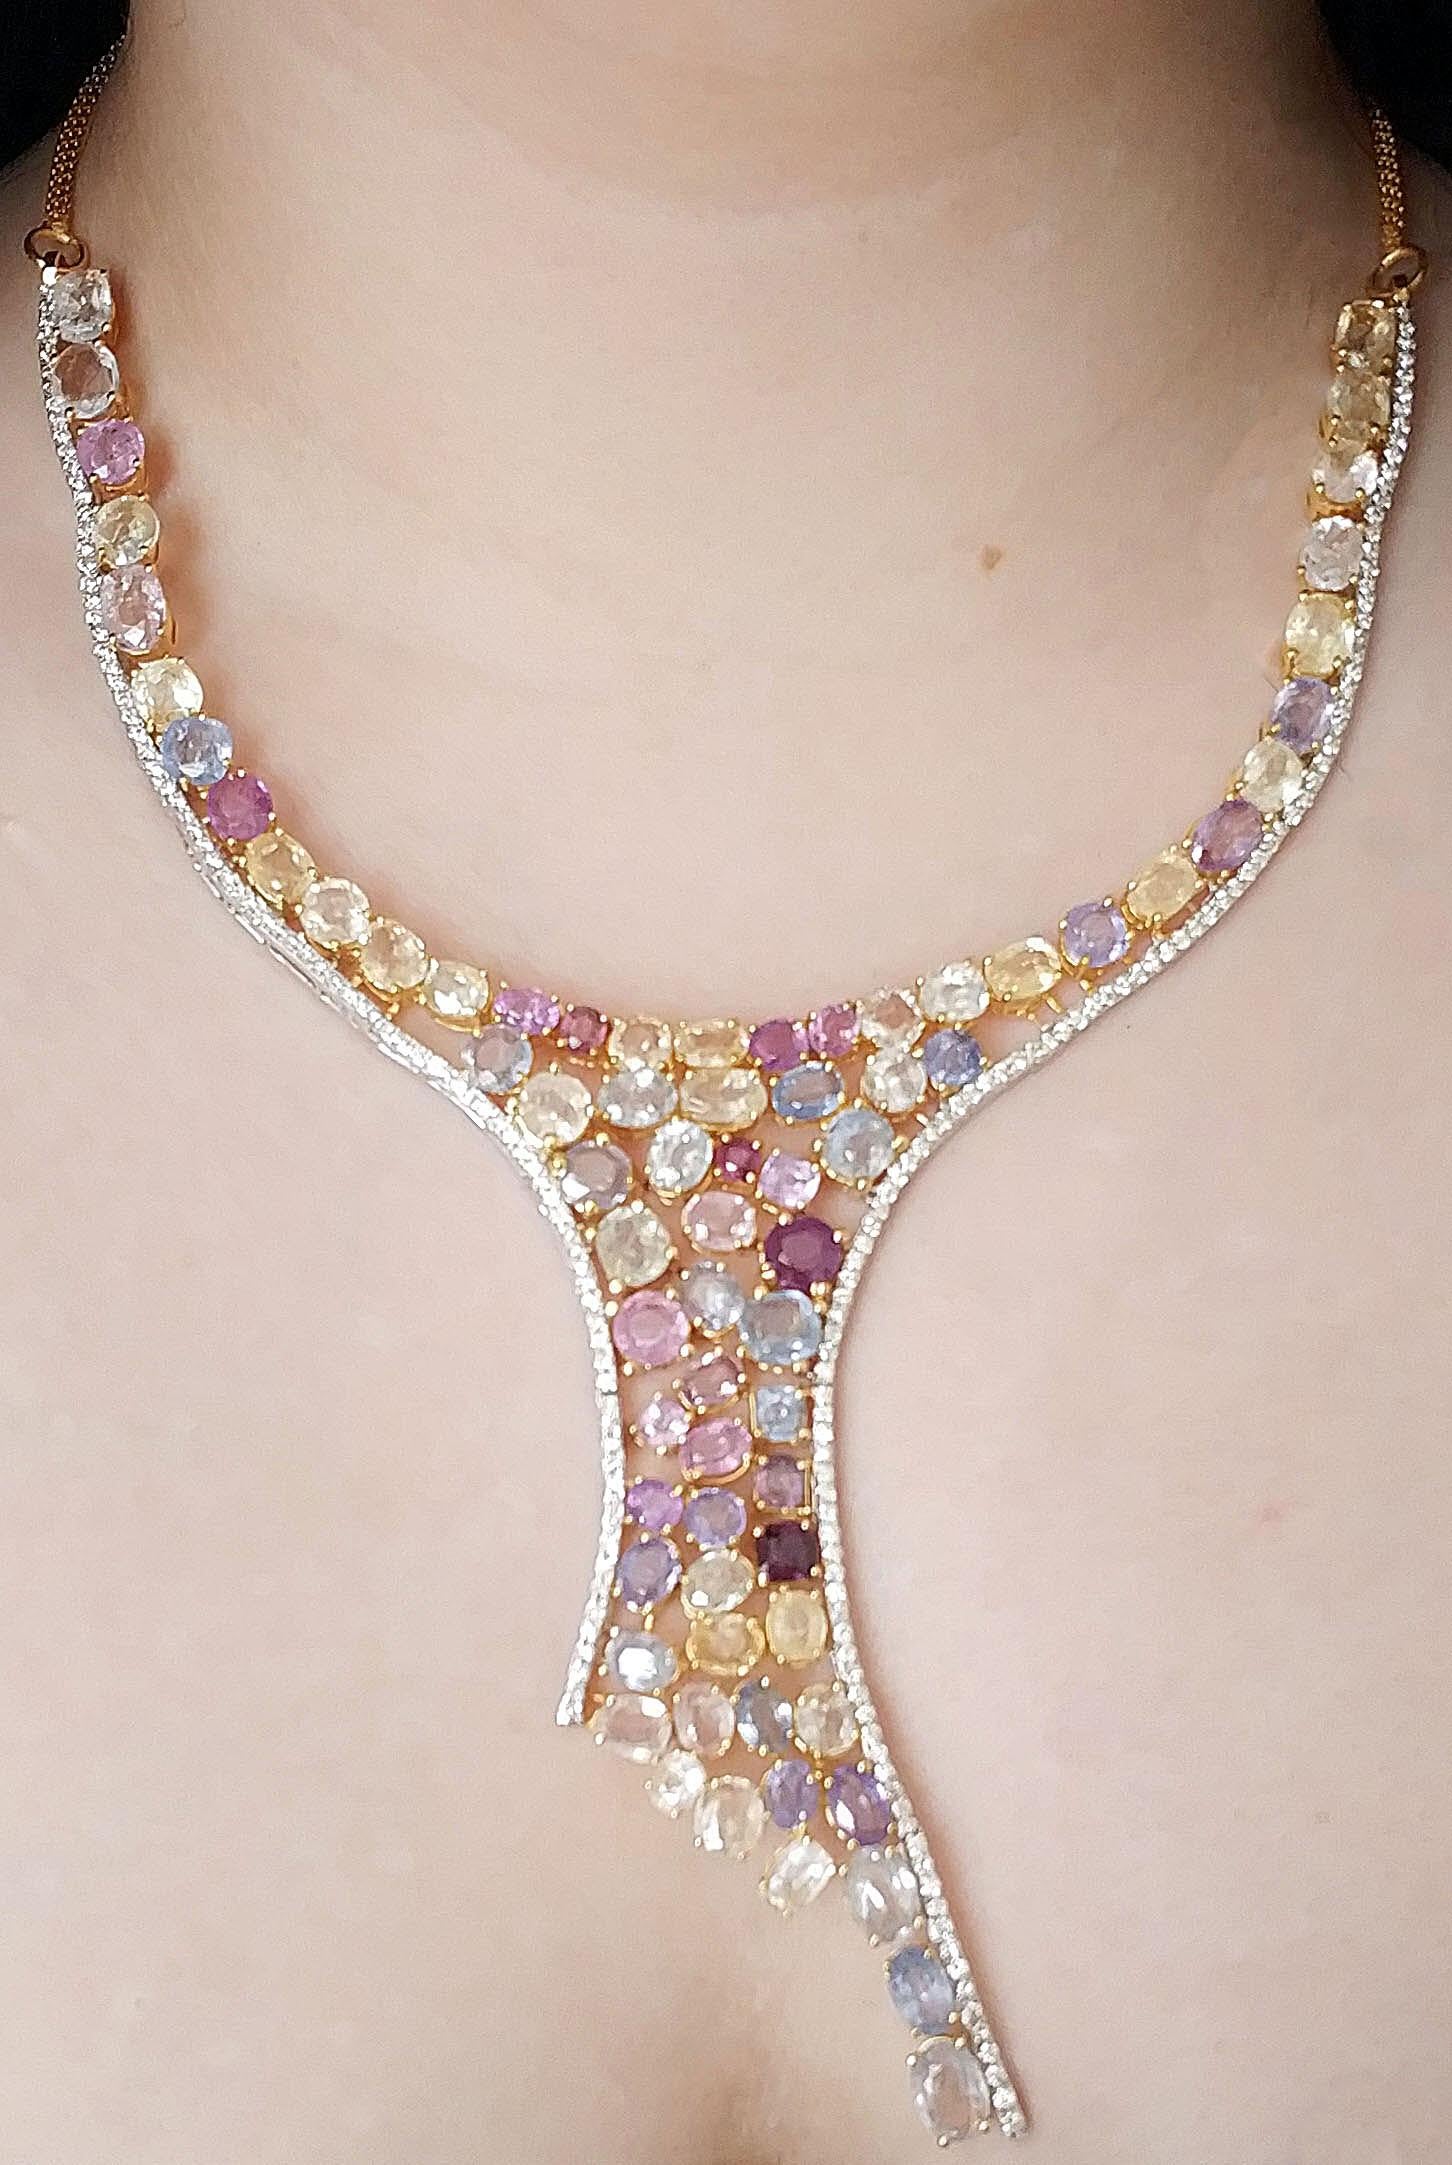 A top quality hourglass design
106.4 carat multicoloured sapphire and 6.2 carat diamond necklace 
Solid 18 carat gold
Weight- 71.1 gms.
The sapphires and diamonds are all natural and untreated- certified.
RRP for this necklace is £51000
Extremely